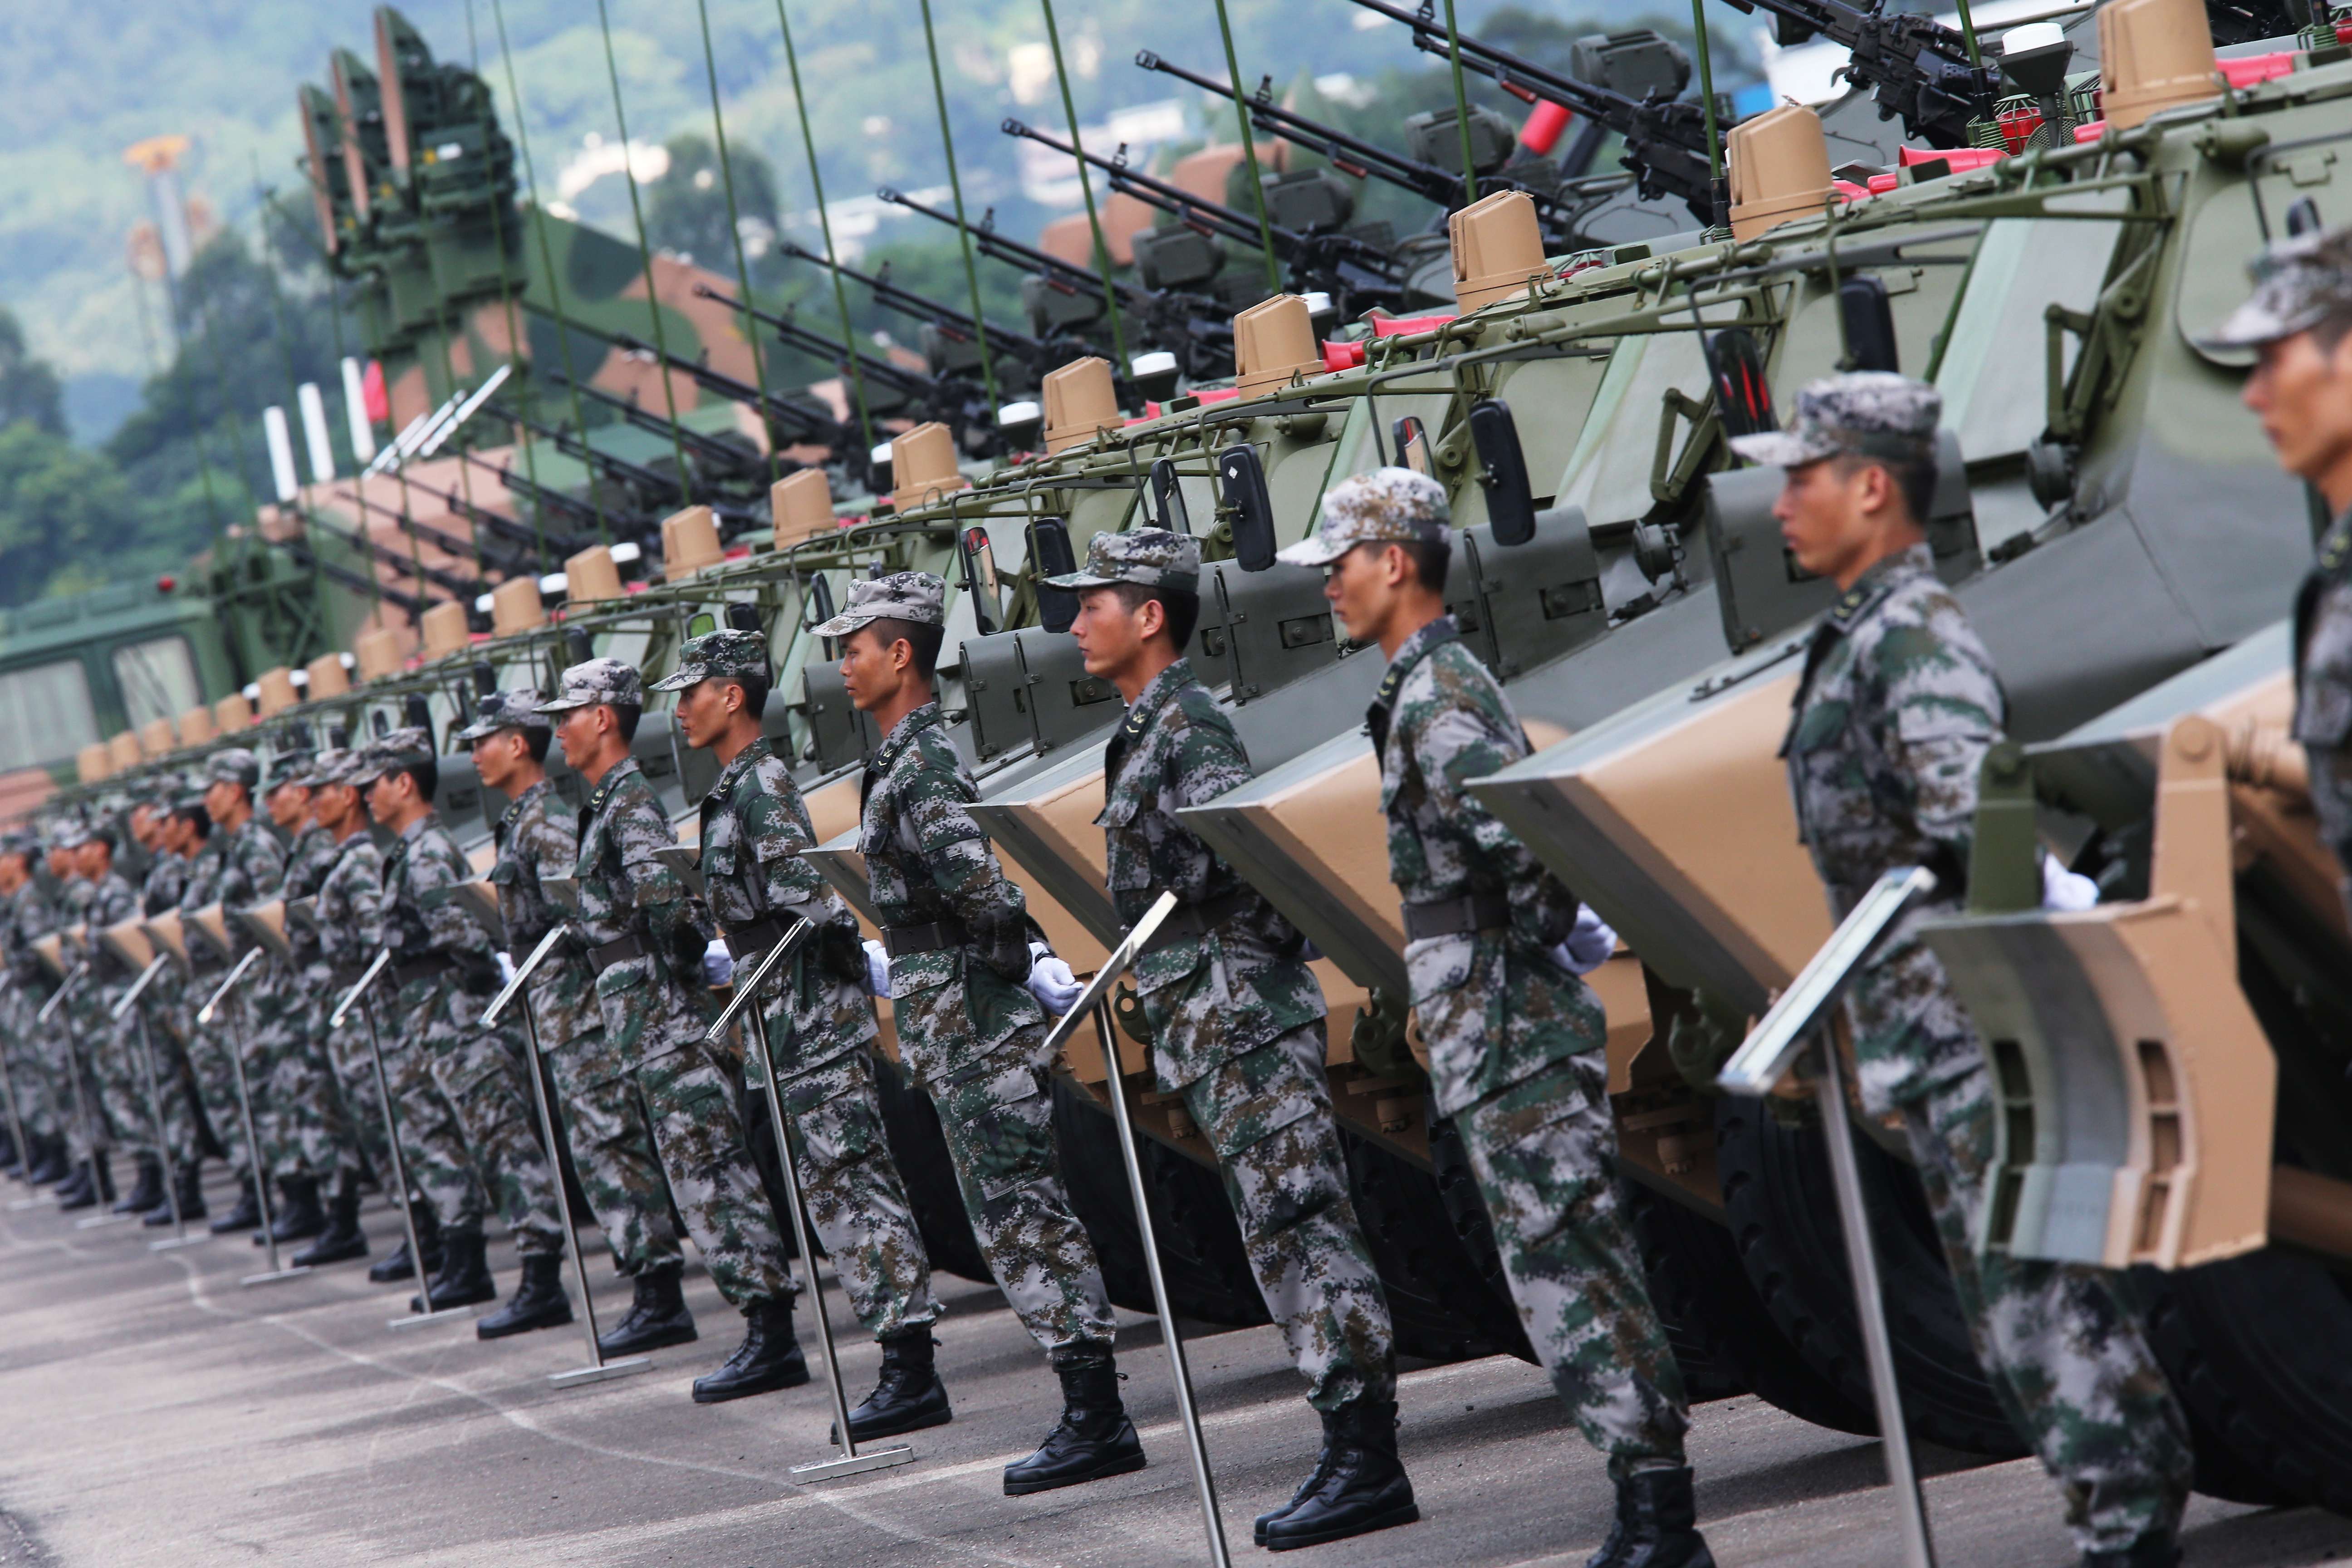 Soldiers from the People's Liberation Army Hong Kong garrison march during a military parade. The garrison is restricted from interfering in local affairs. Photo: Sam Tsang